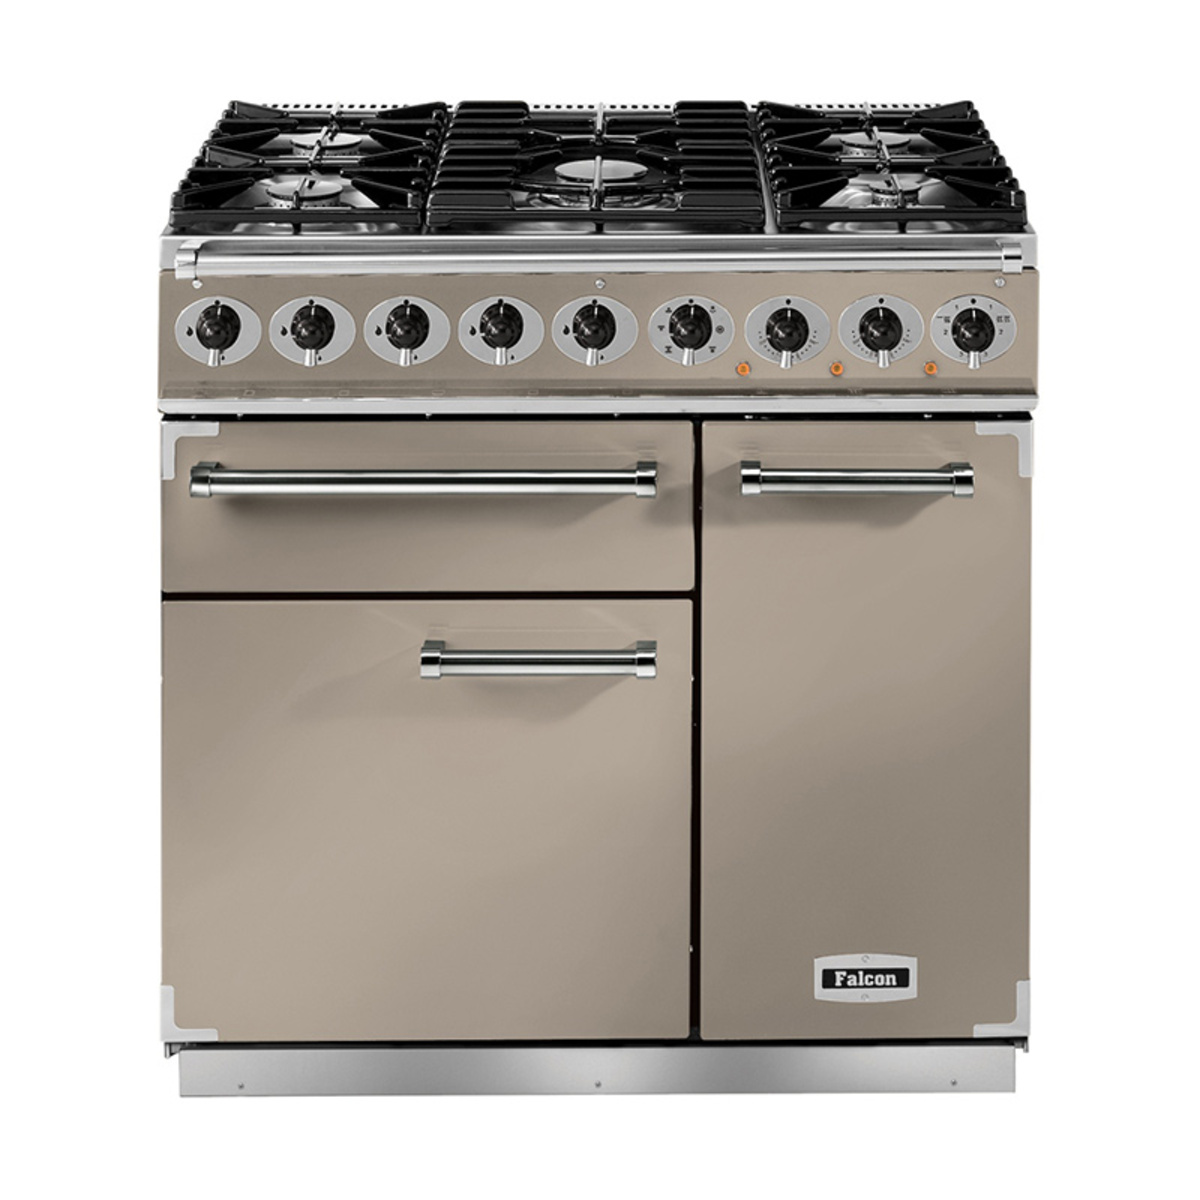 FALCON 115300 (F900DXDFFN/NM) 90cm Deluxe Dual Fuel Range Cooker, Fawn/N